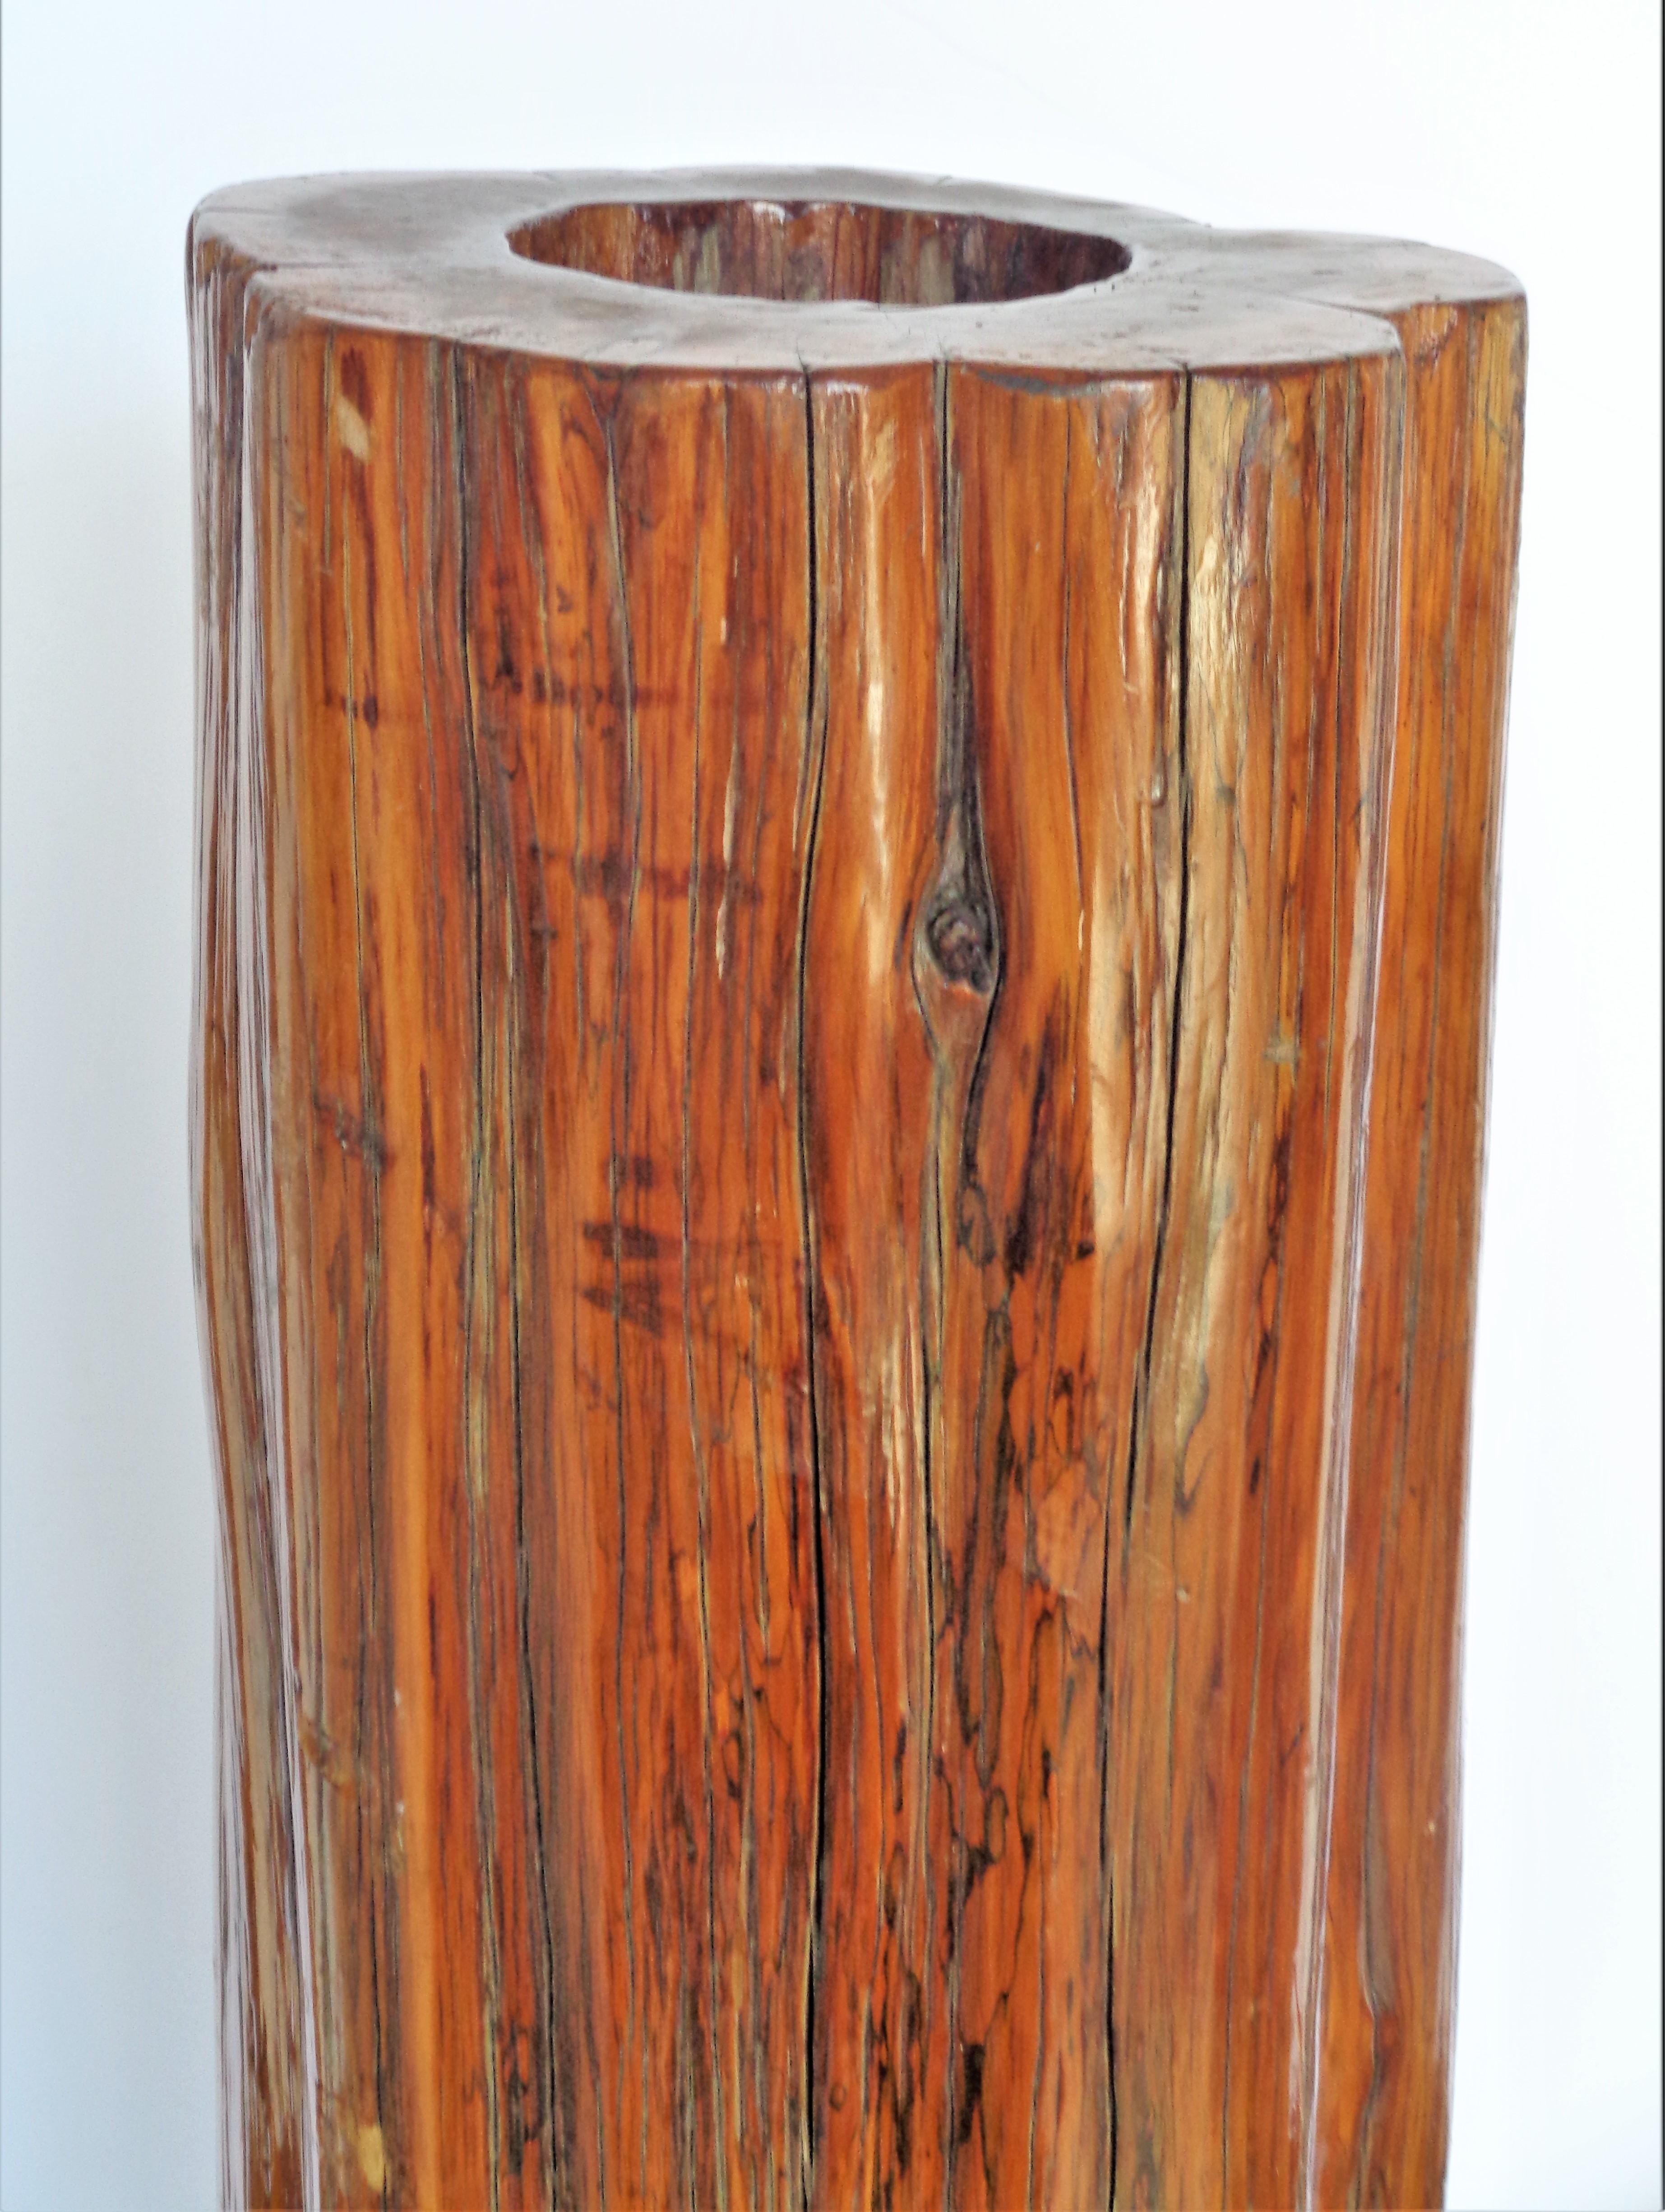 Antique Japanese tall ikebana vase / planter from a yew wood tree trunk with beautifully aged glowing surface color and great natural sculptural form. Dates from the late 19th century - early 20th century. Look at all pictures and read condition